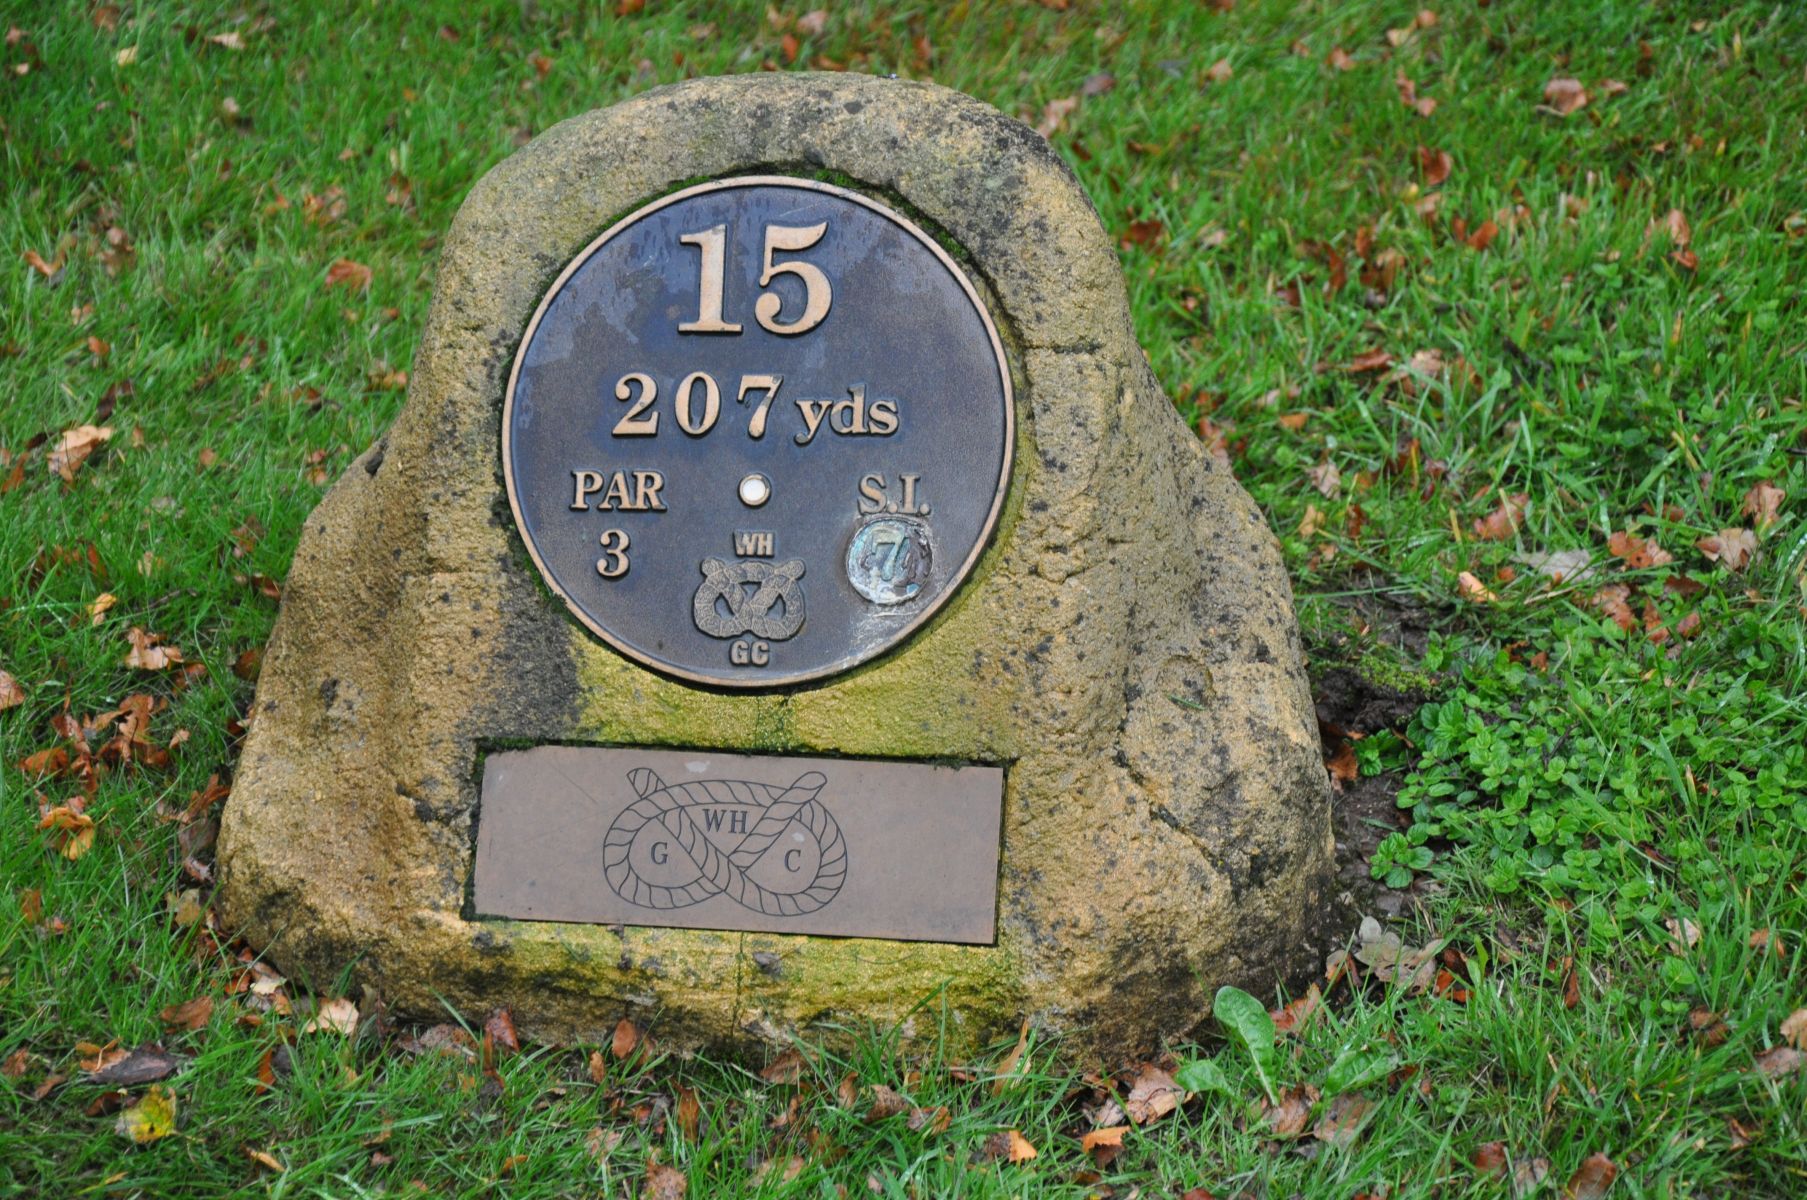 THE WHITE TEE MARKER FOR HOLE FIFTEEN